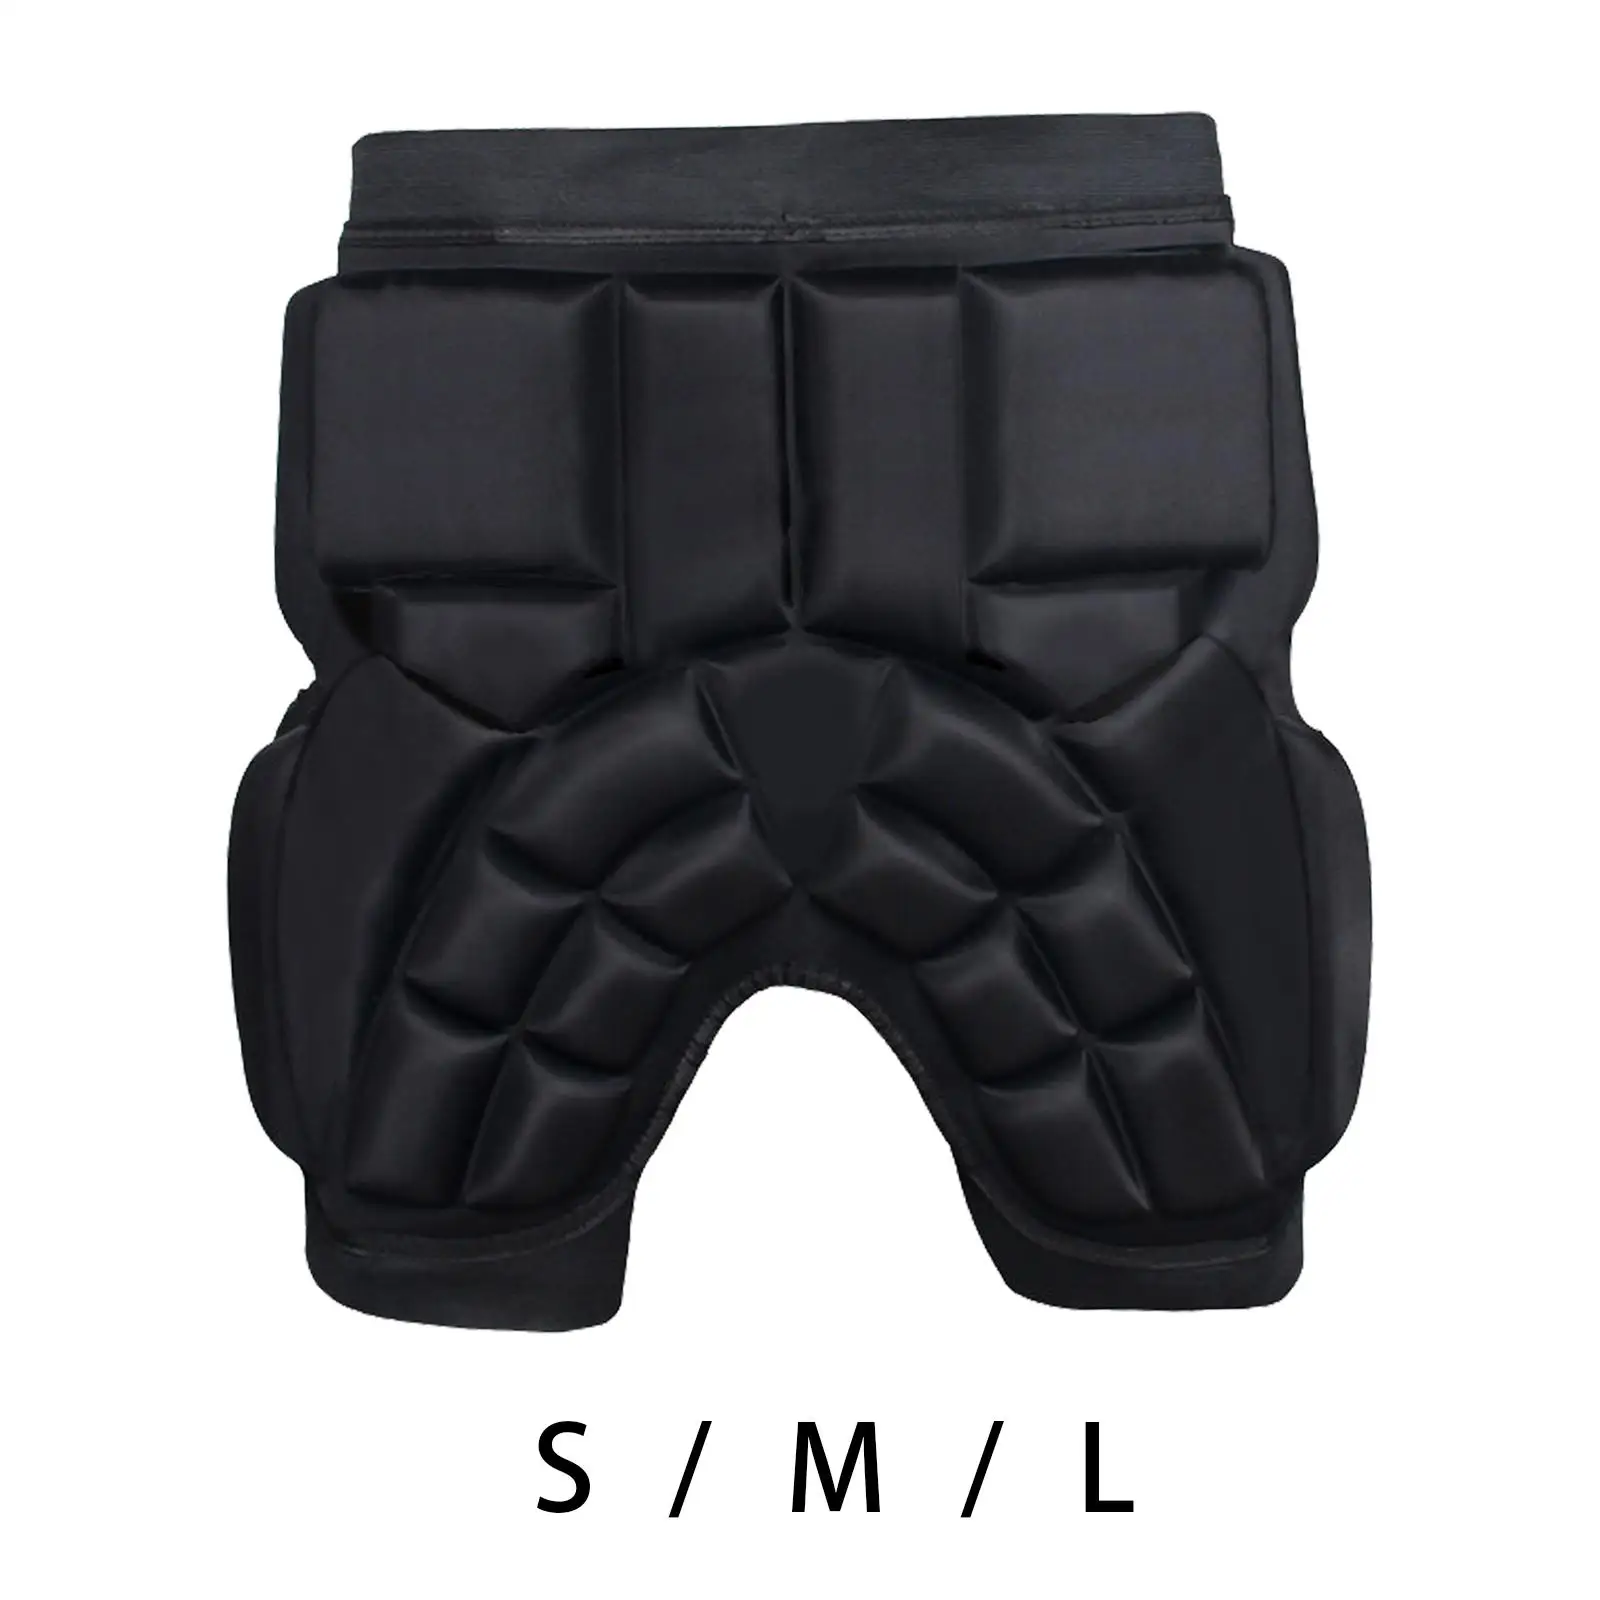 Hip Guard Pad Padded Supporter Shockproof Protector Compression Impact Protection for Skateboarding Skiing Cycling Biking Sports